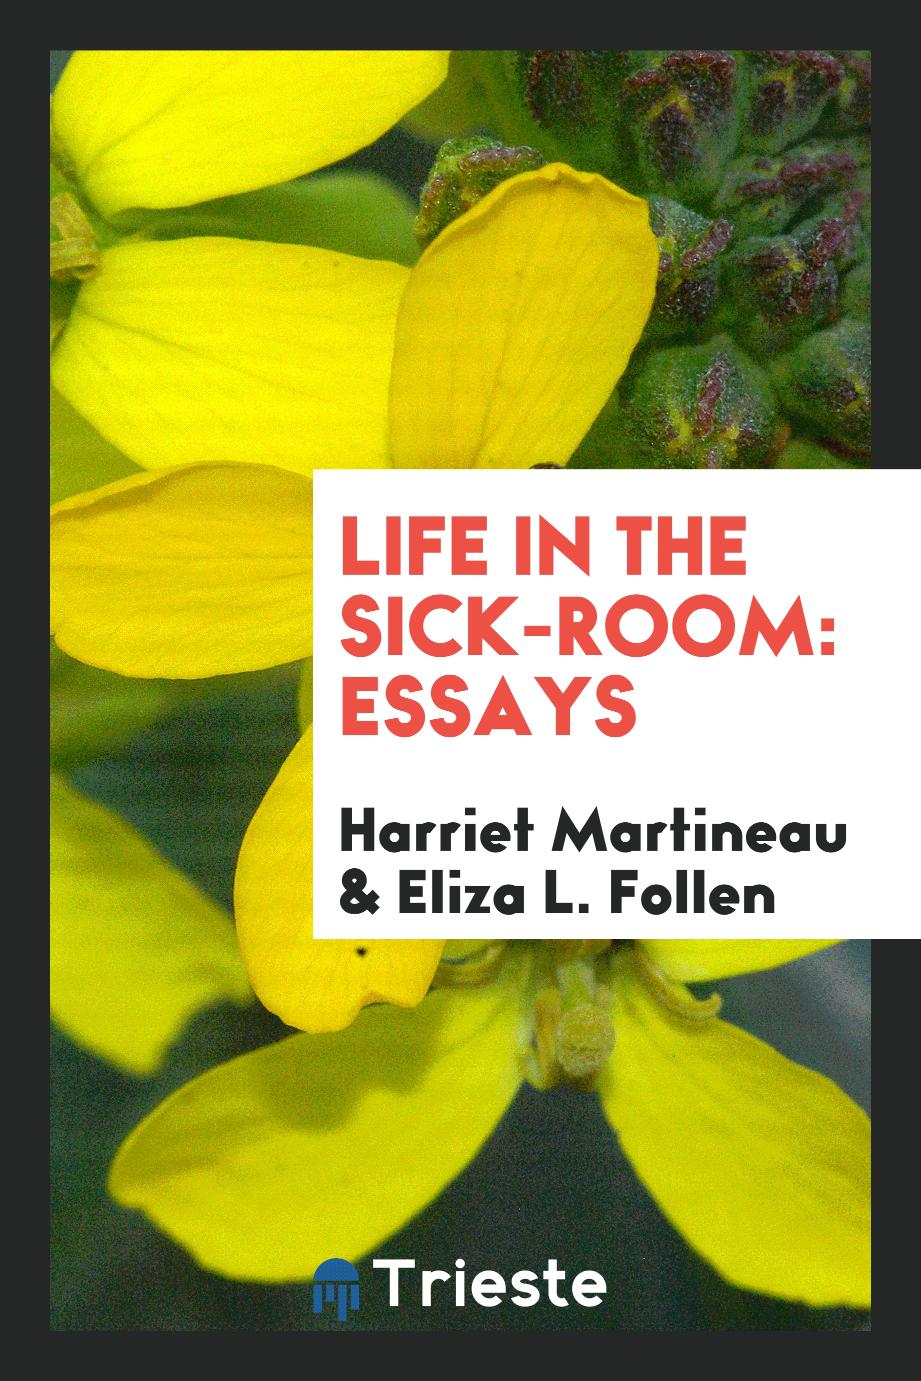 Life in the sick-room: essays